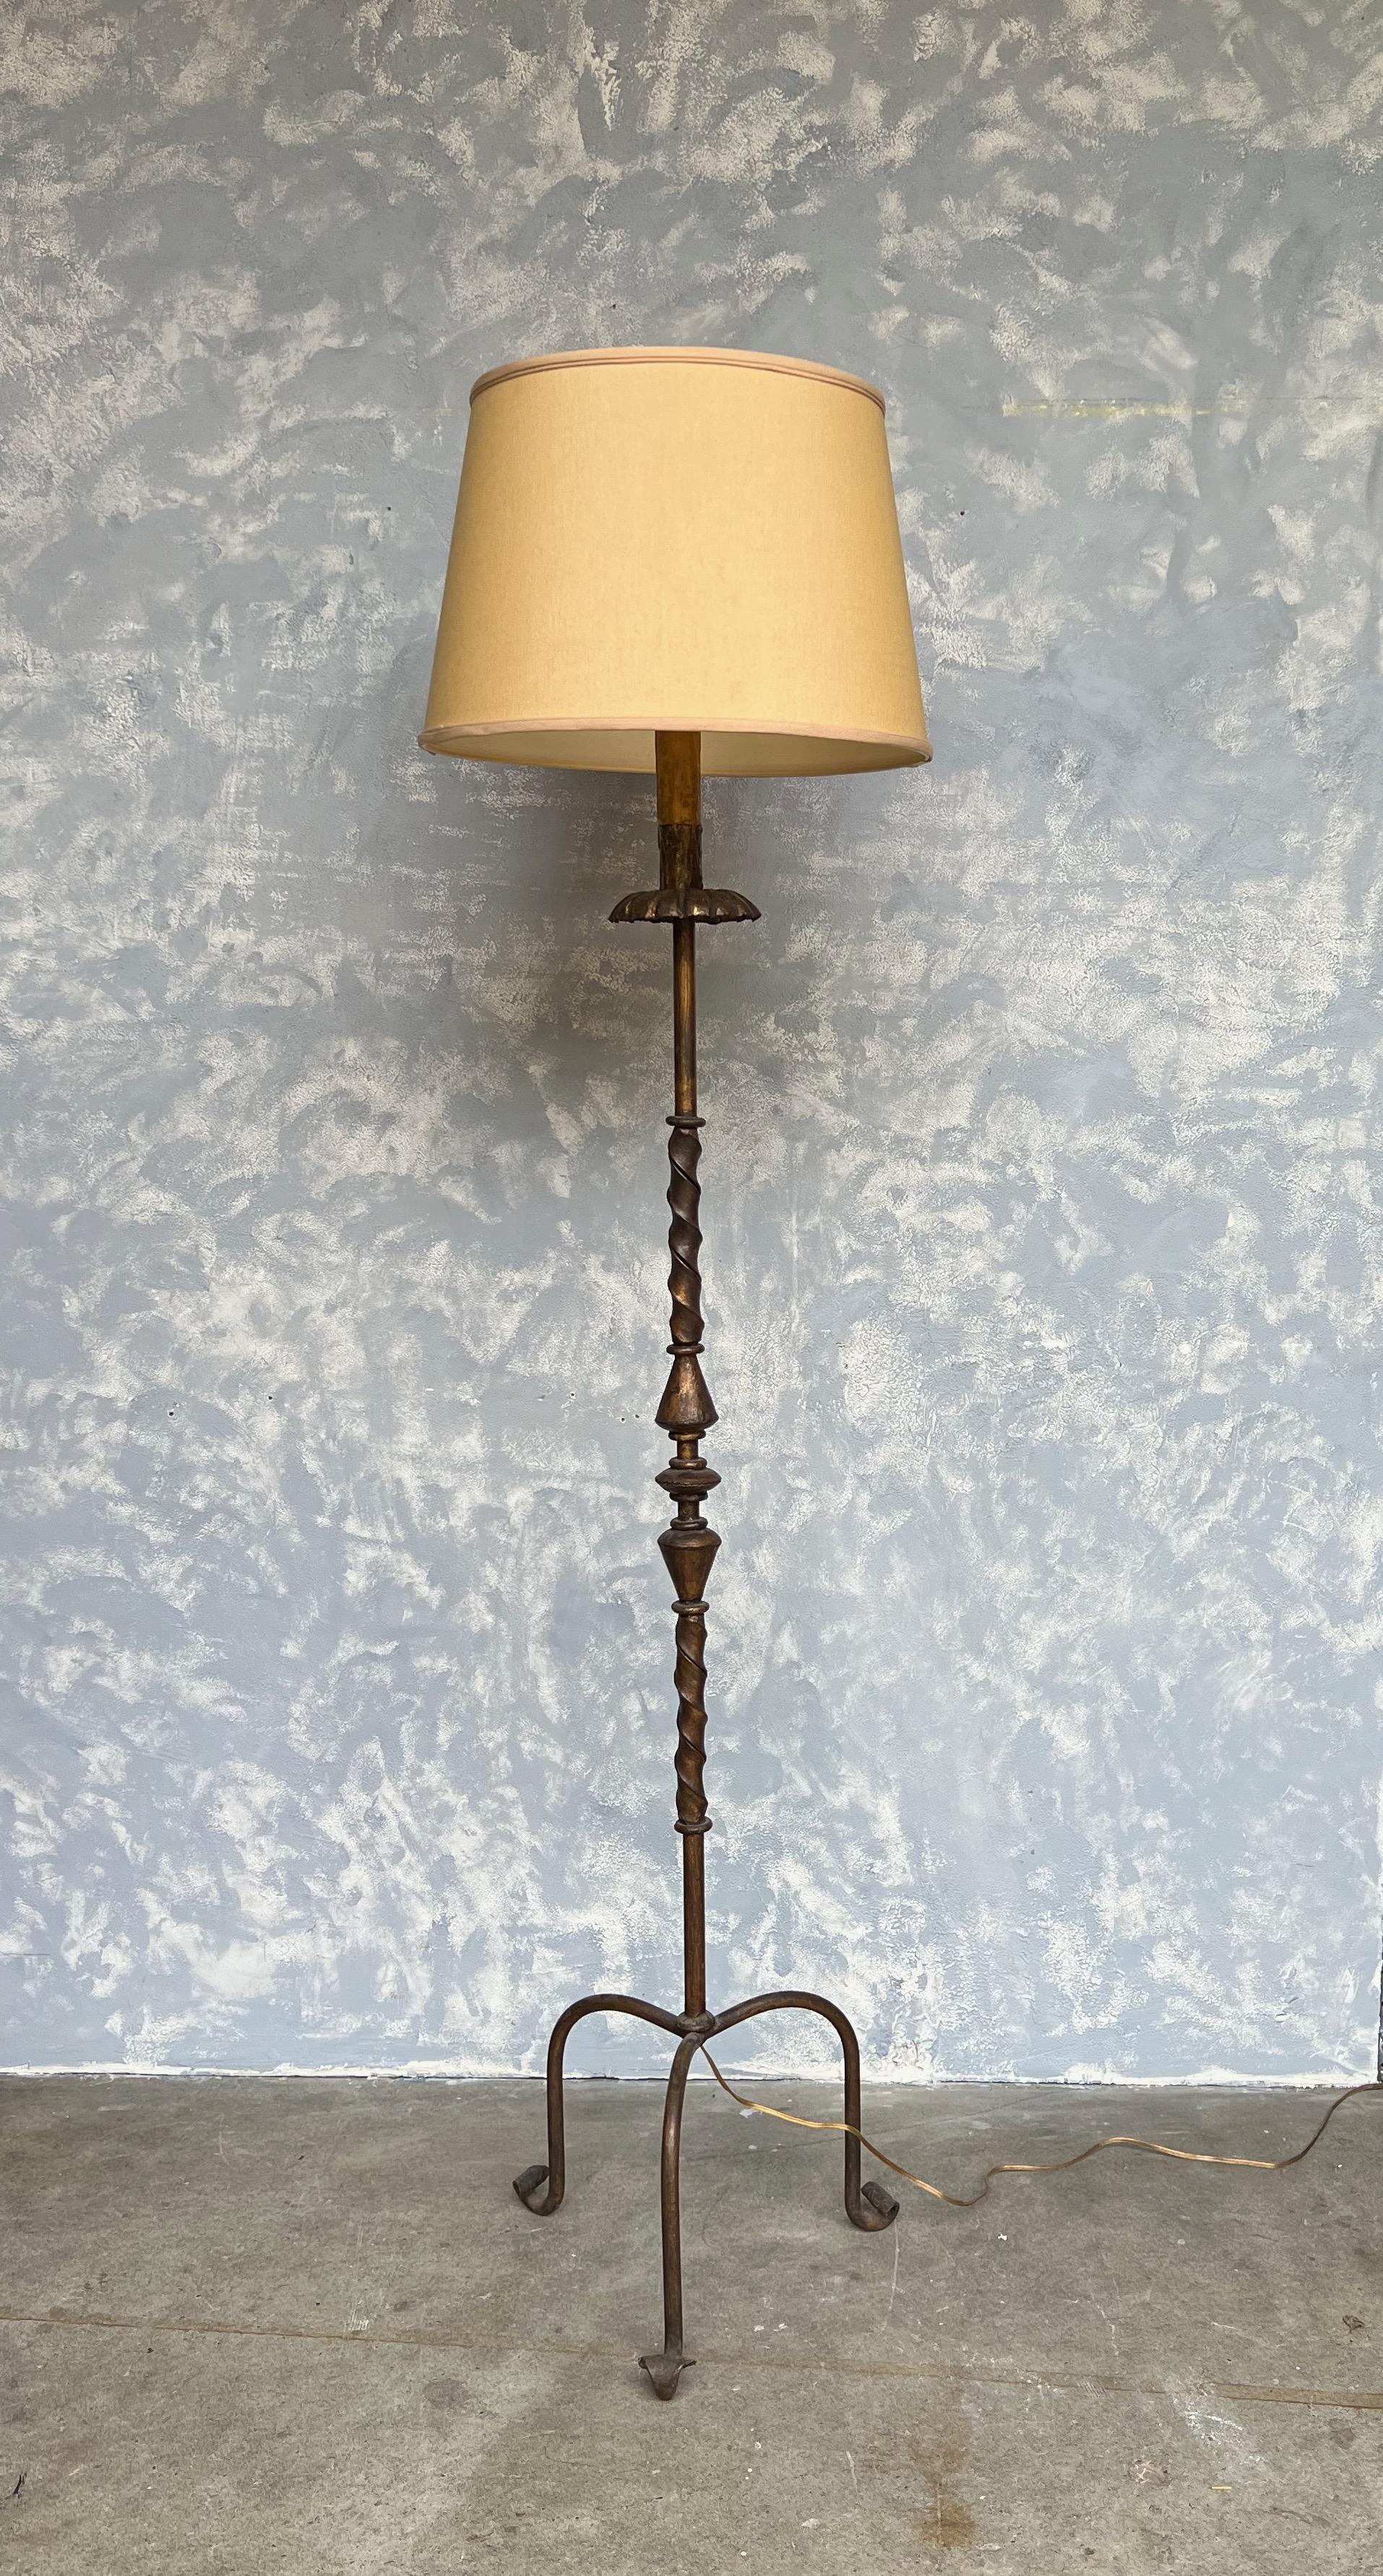 This Spanish gilt iron floor lamp, dating back to the 1950s, is a distinctive piece with its elevated tripod base. The lamp possesses an aged darkened gold patina that adds character and an air of antiquity. The stem's upper part features a double